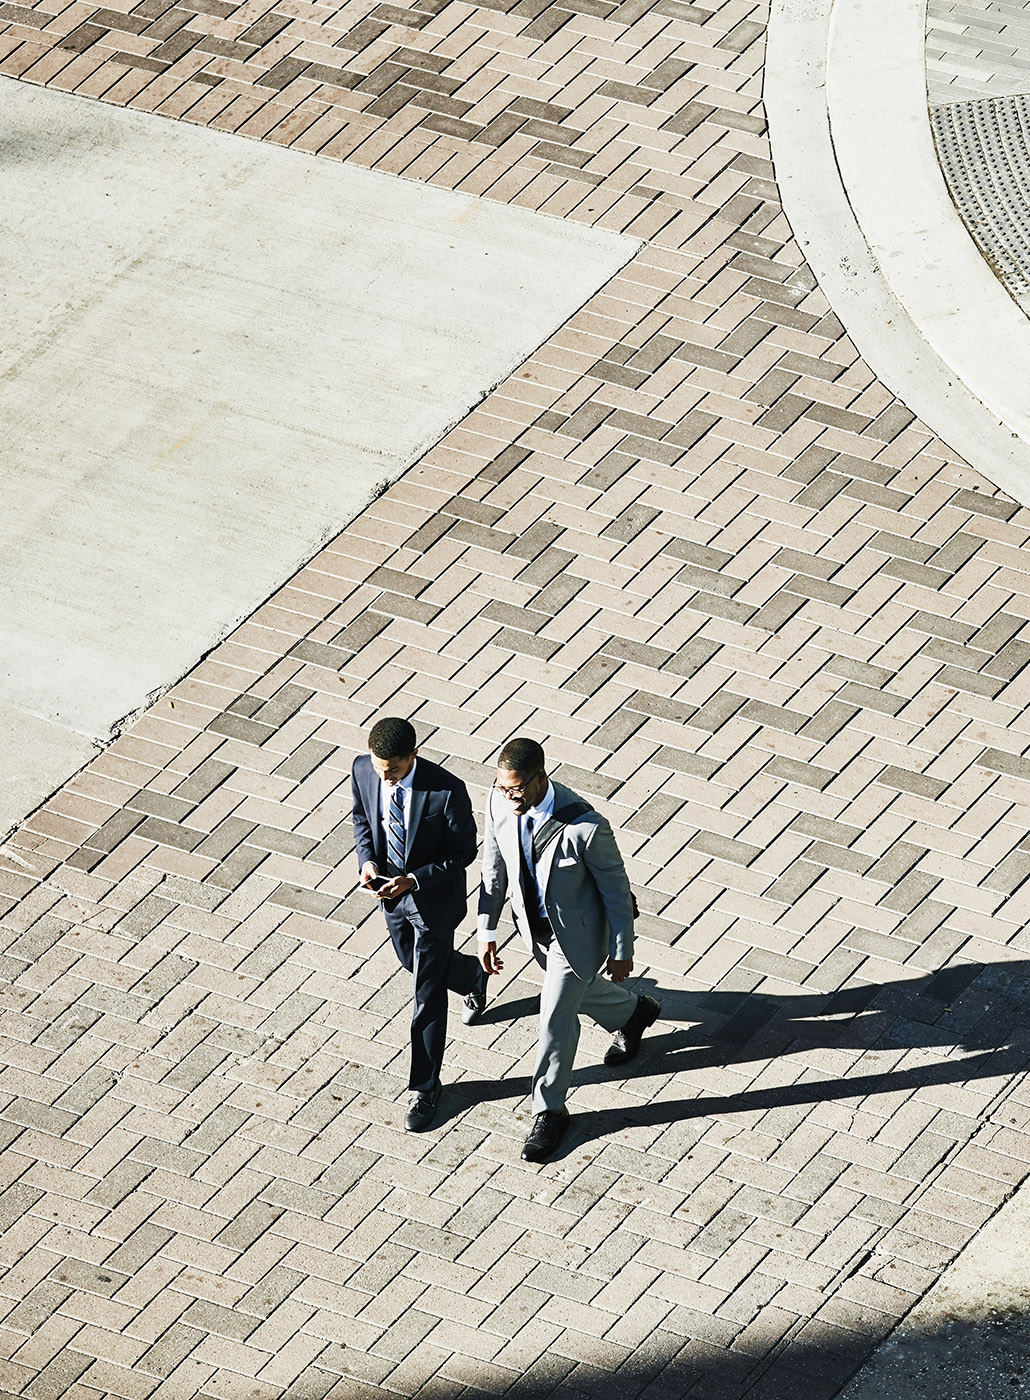 Overhead view of two businessmen in discussion walking across downtown street.